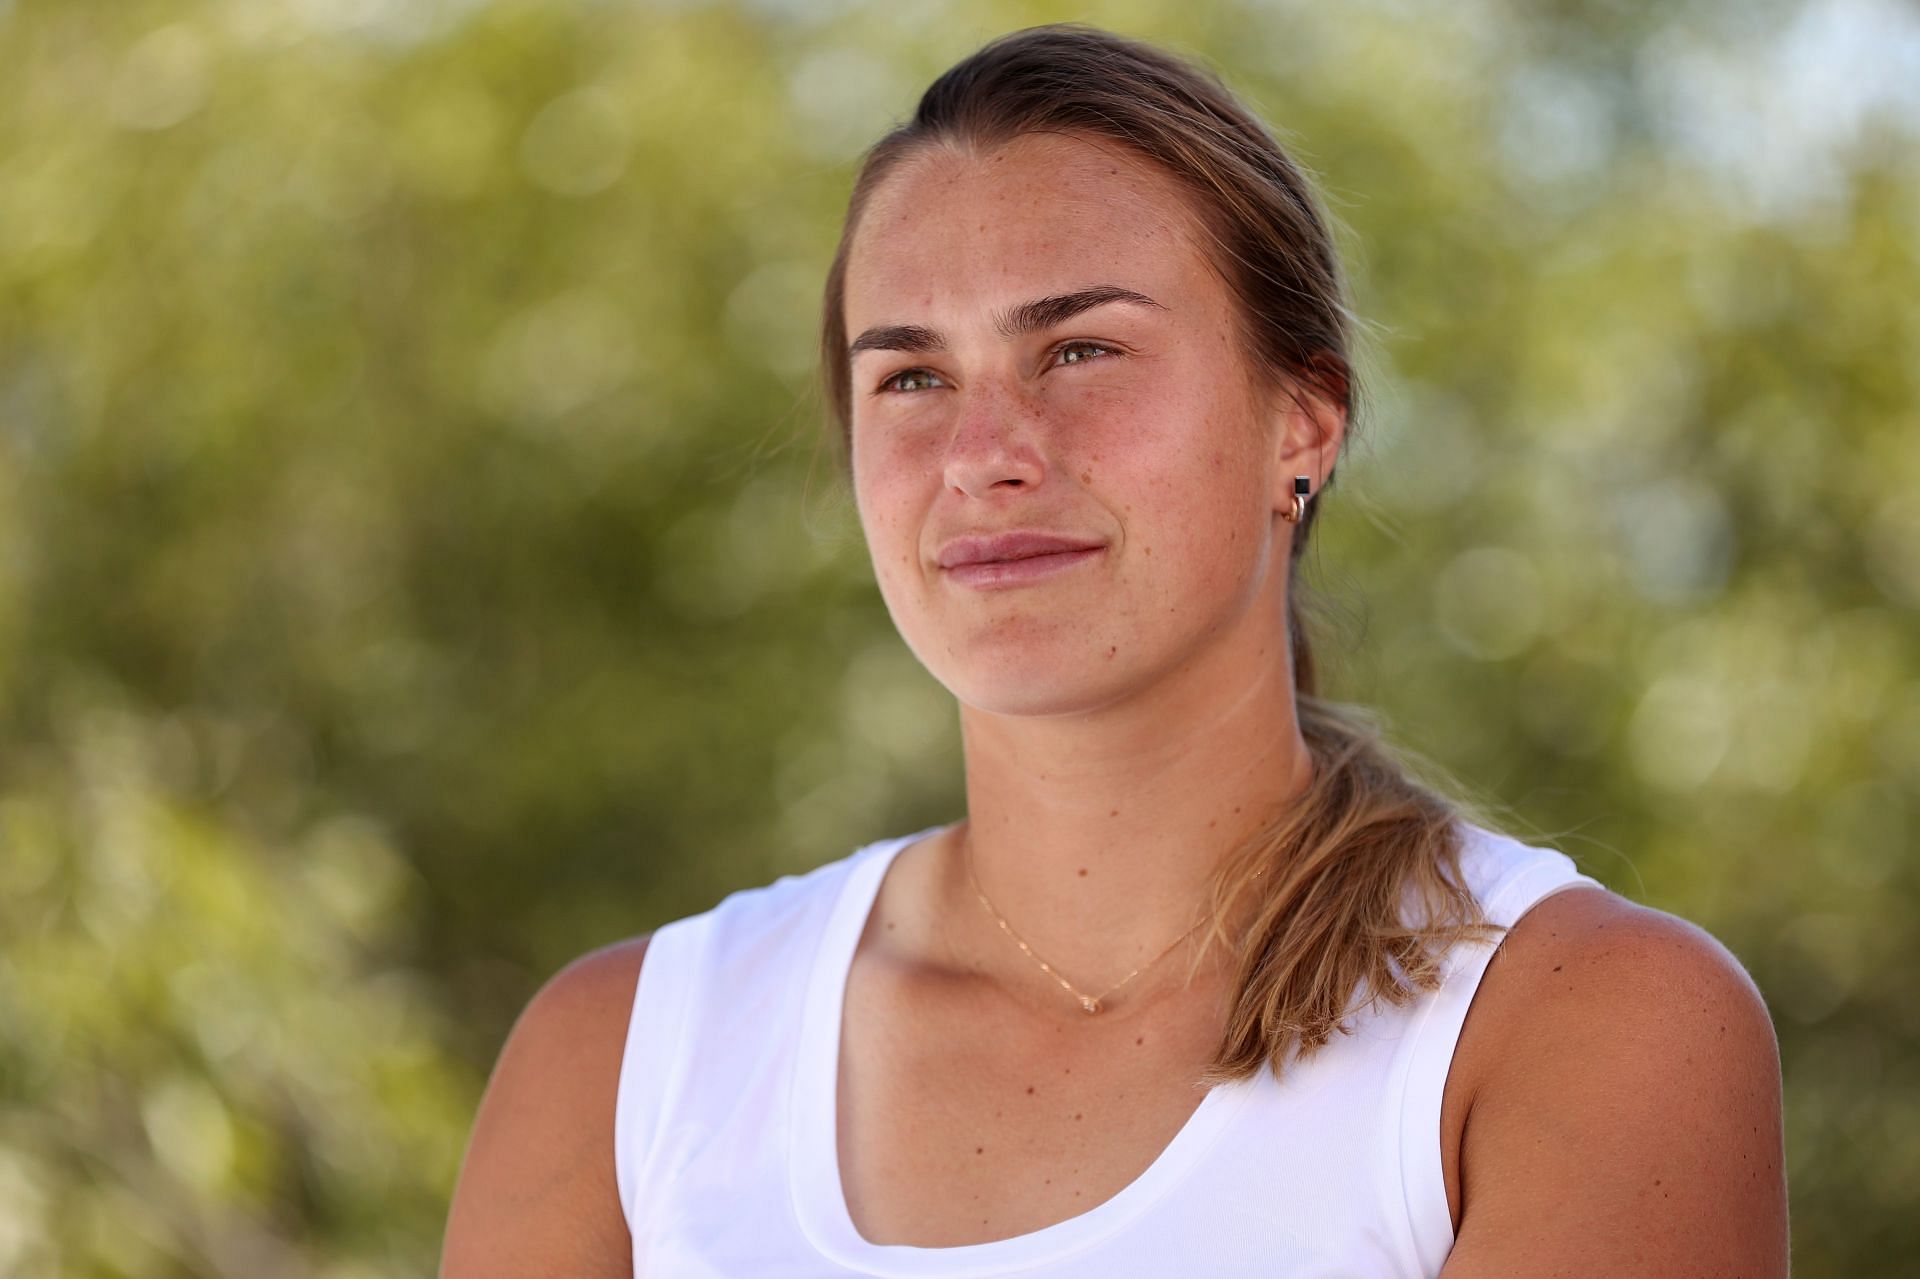 Aryna Sabalenka pictured at the 2021 WTA Finals - Previews.